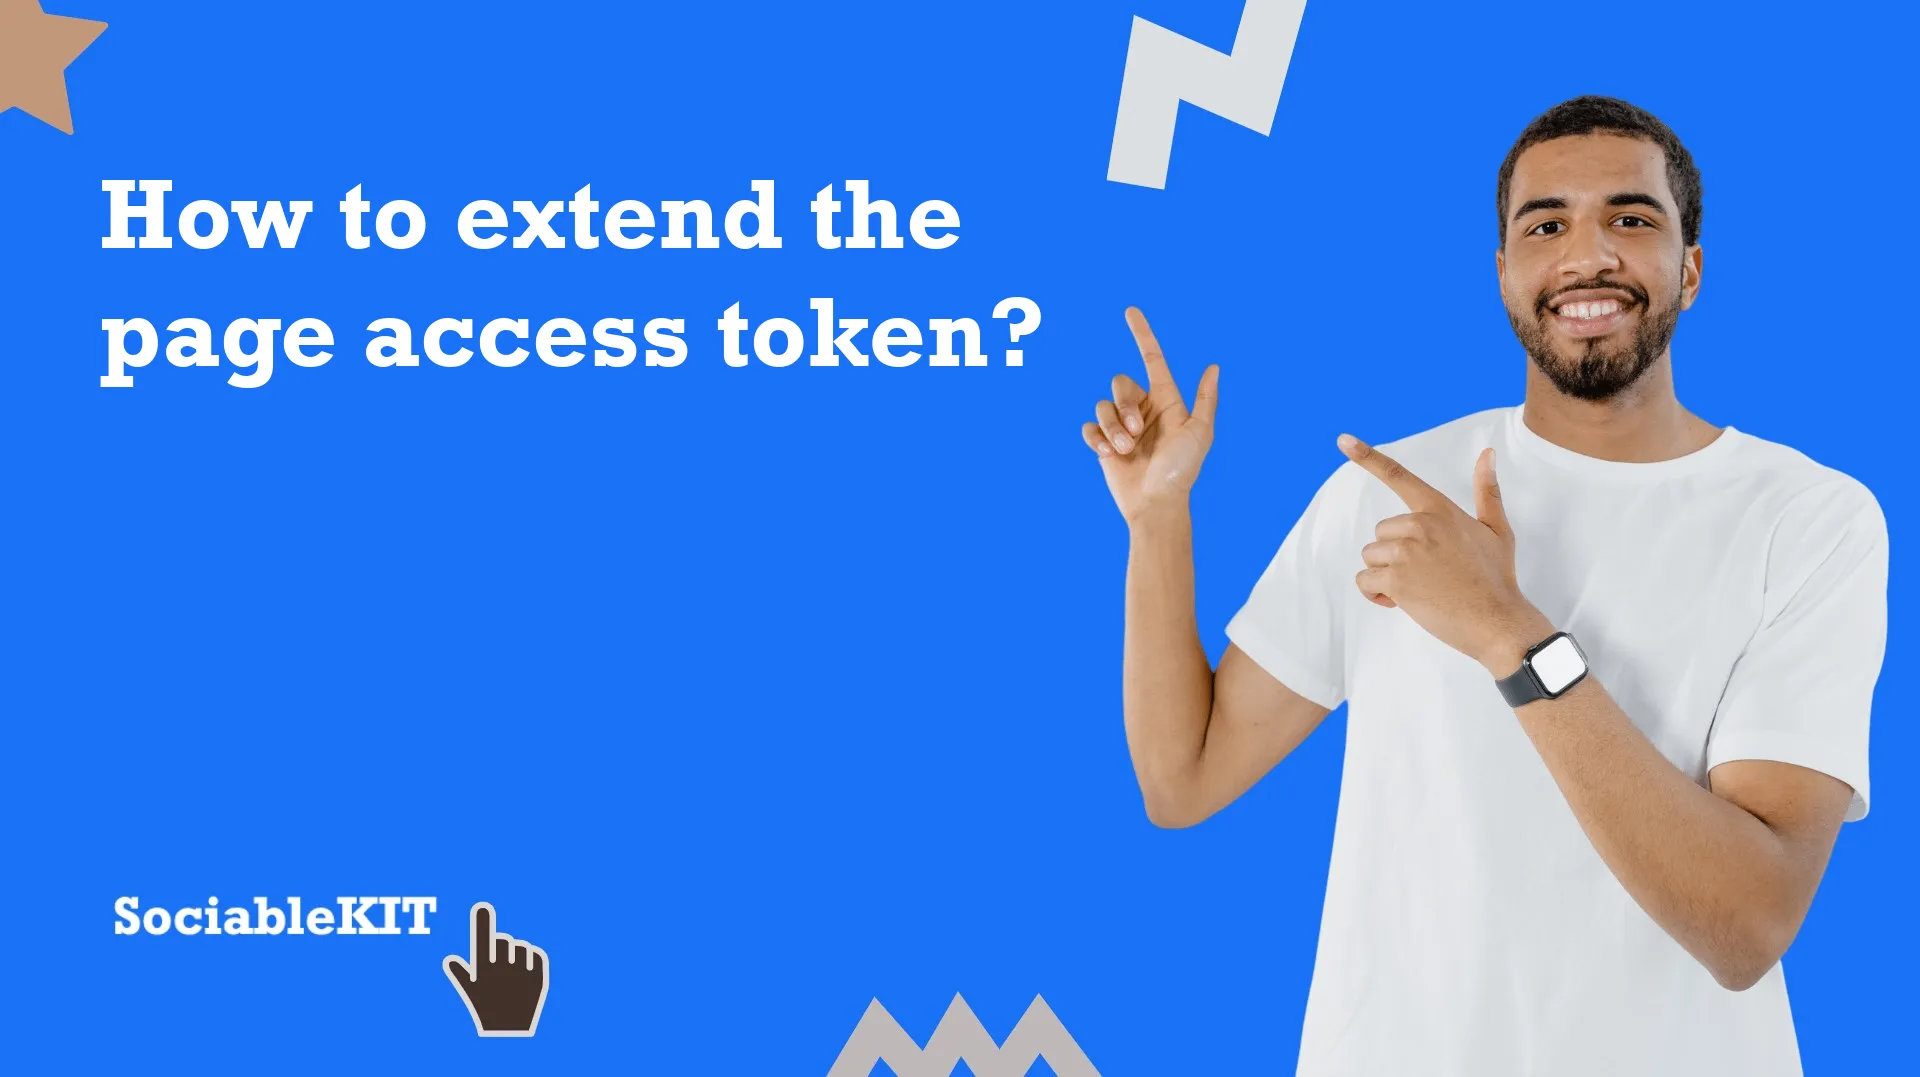 How to extend the page access token?